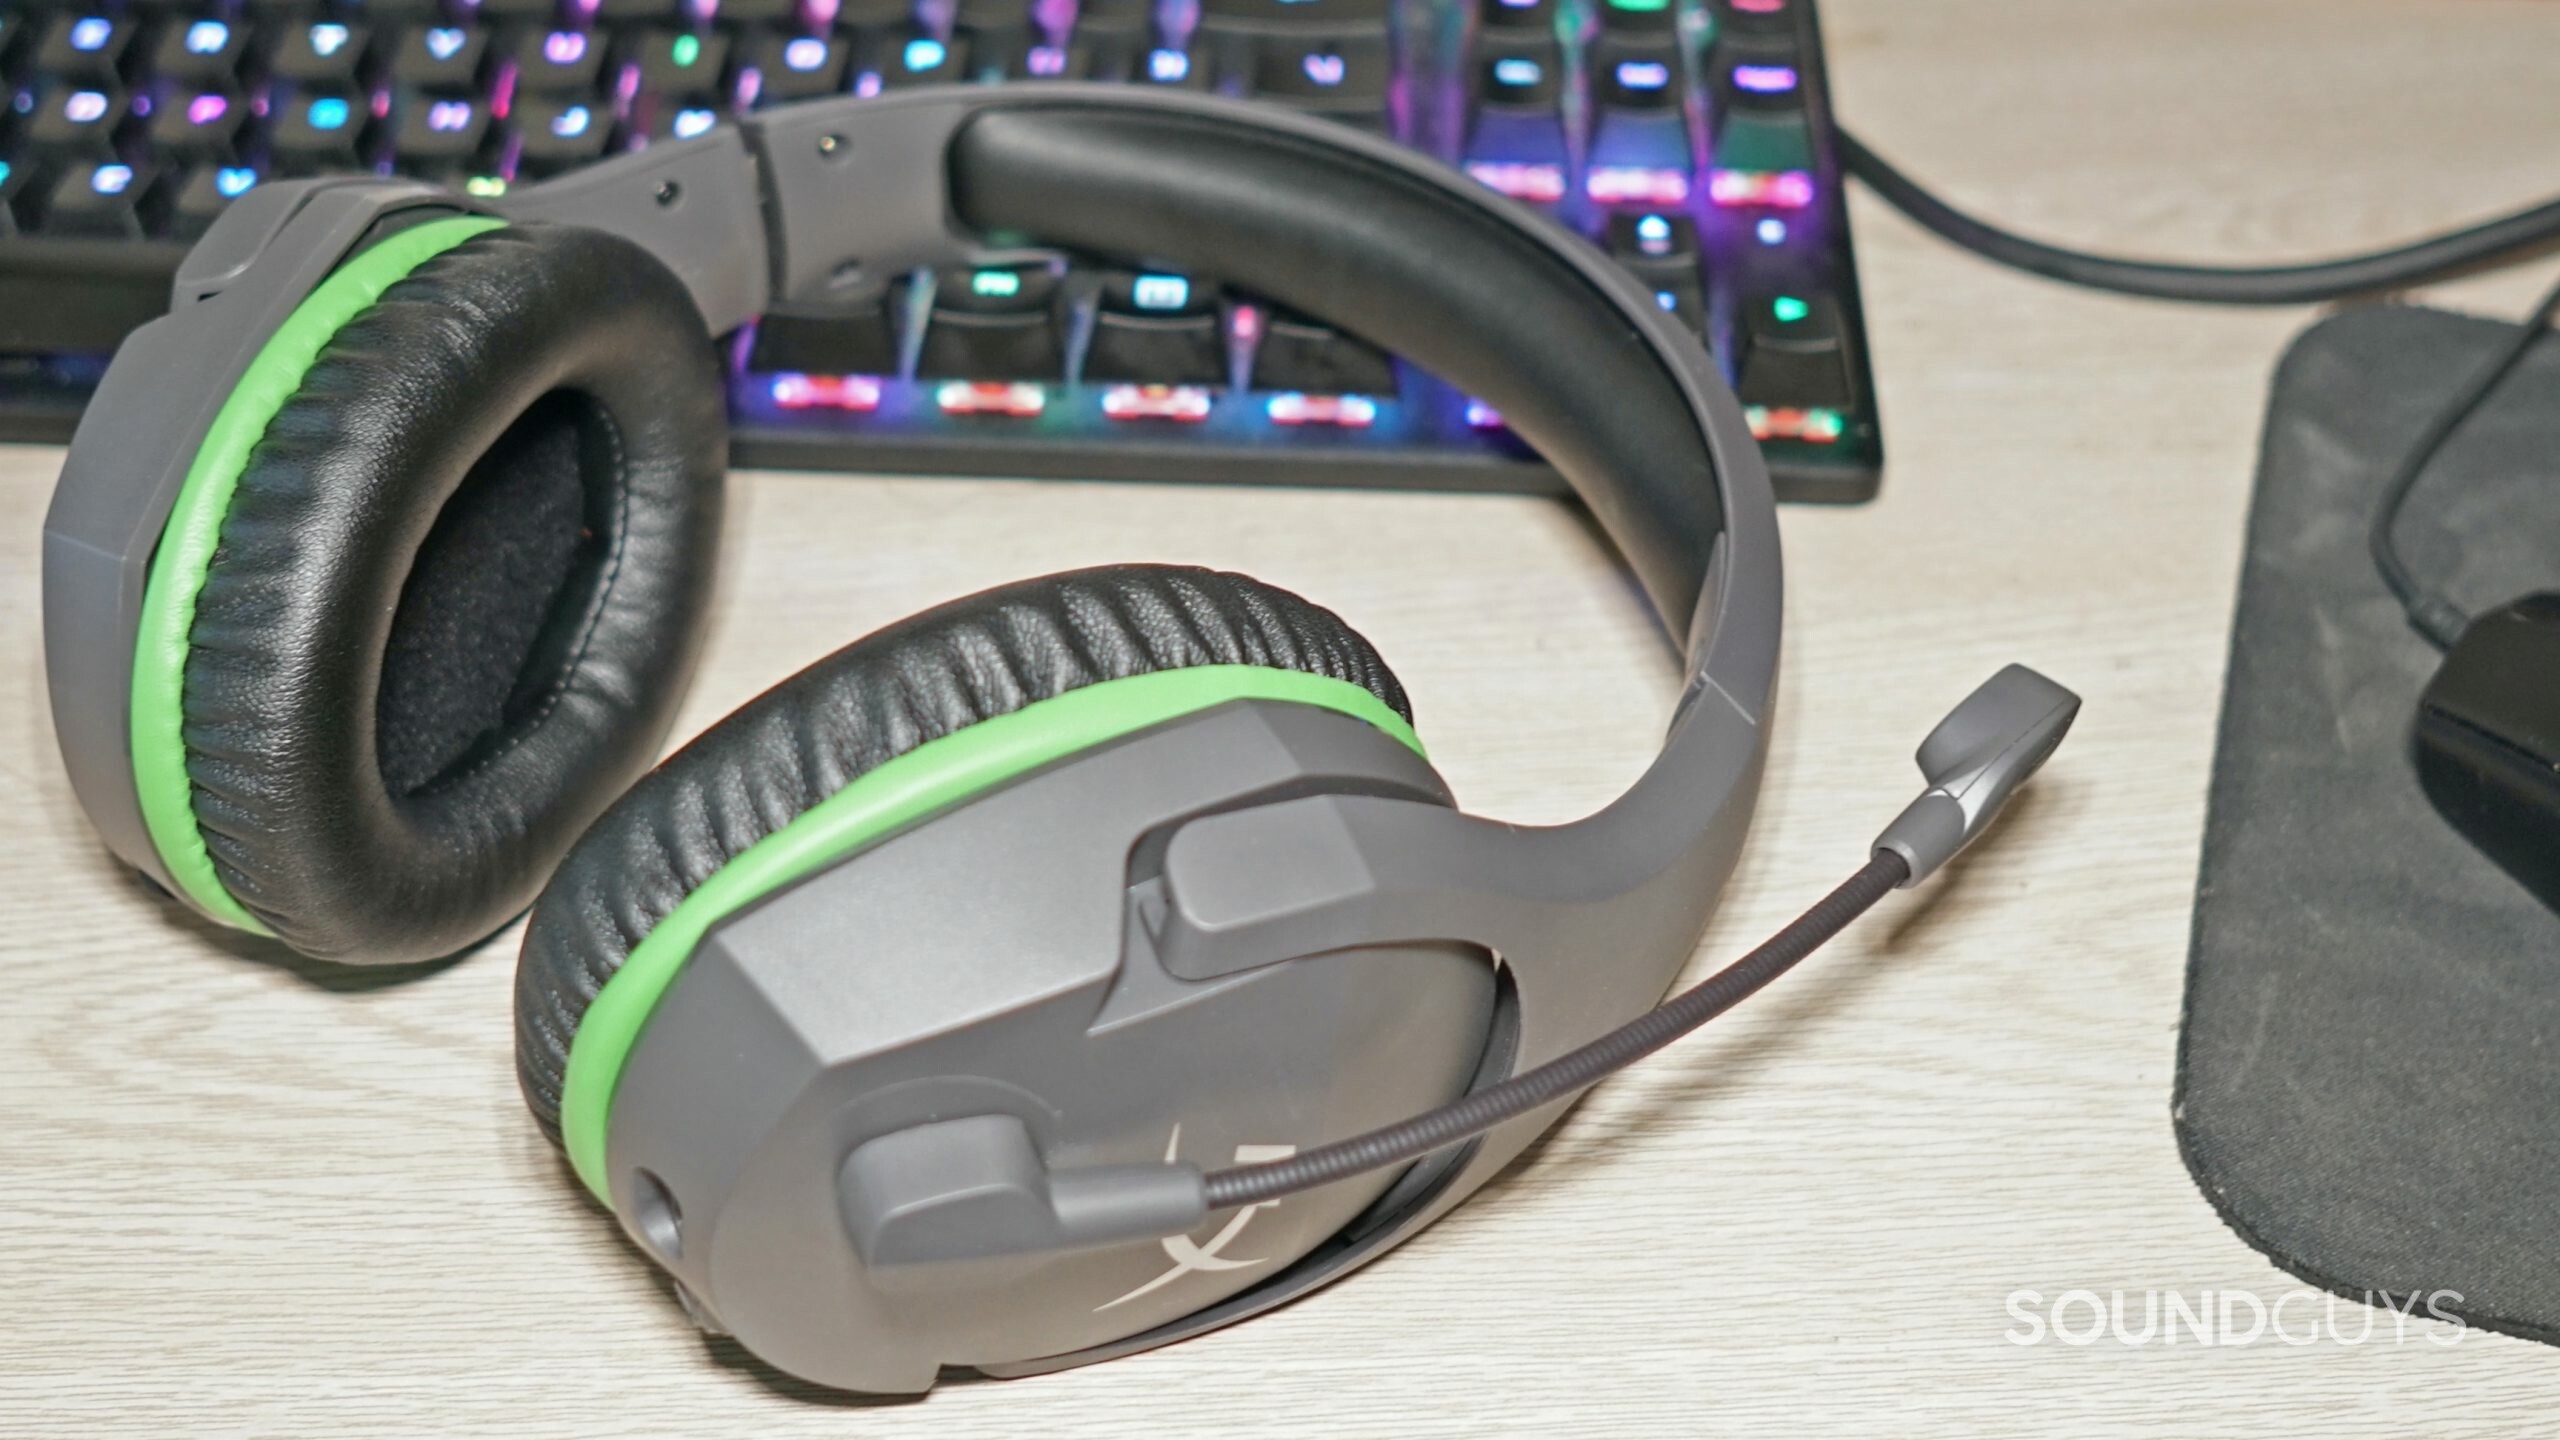 HyperX CloudX Stinger Core gaming headset lays on a desk next to a HyperX gaming keyboard and a Logitech gaming mouse.